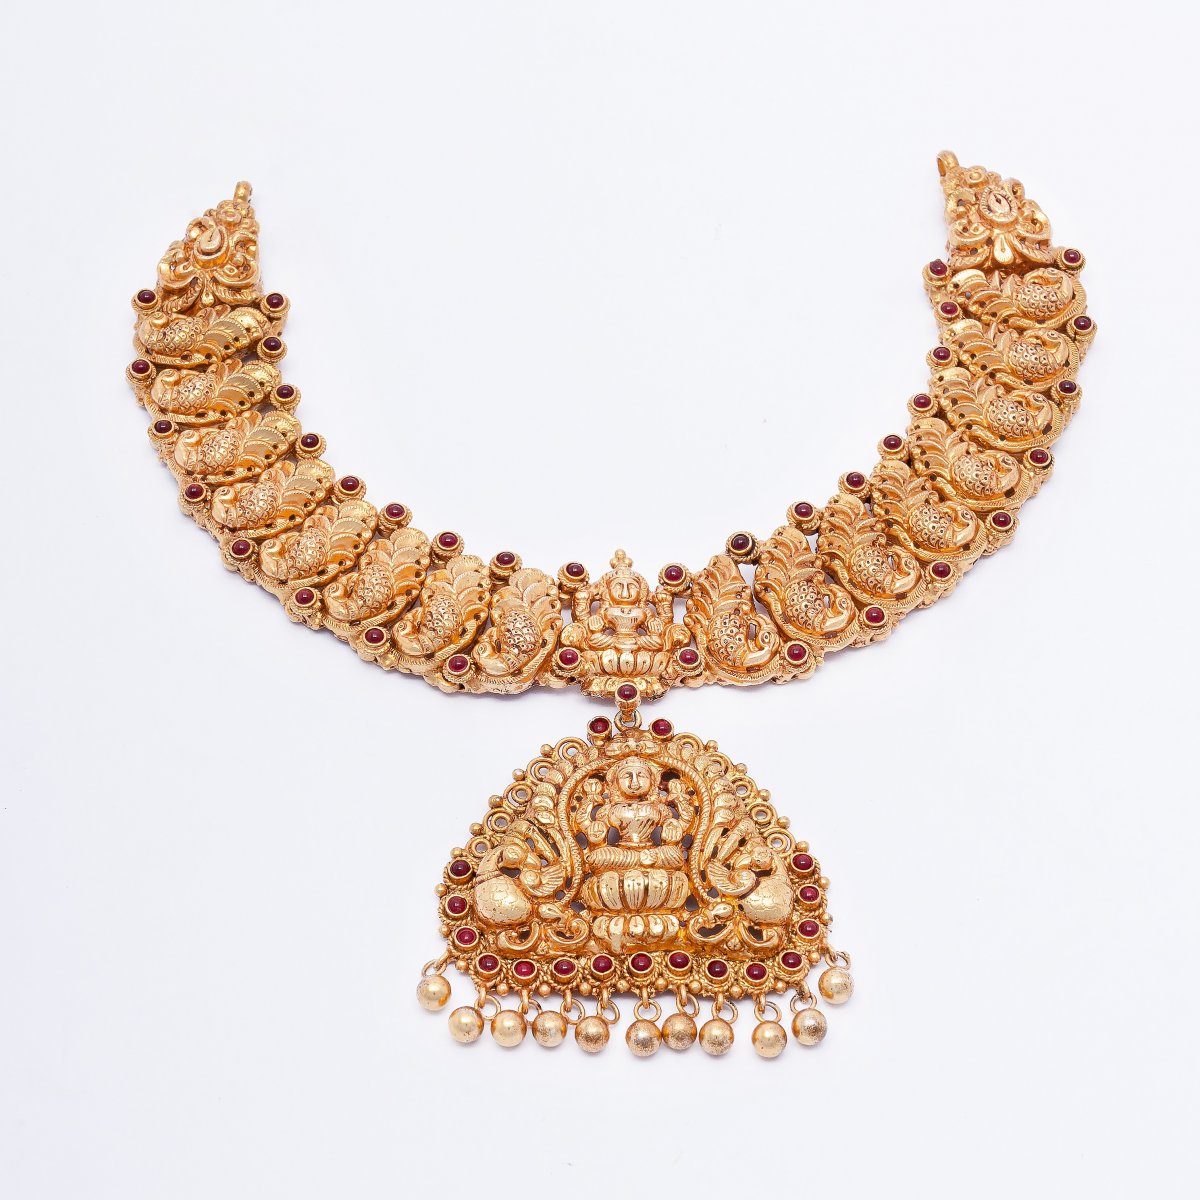 GOLD PLATED TRADITIONAL TEMPLE JEWELLERY NECKLACE IN SILVER